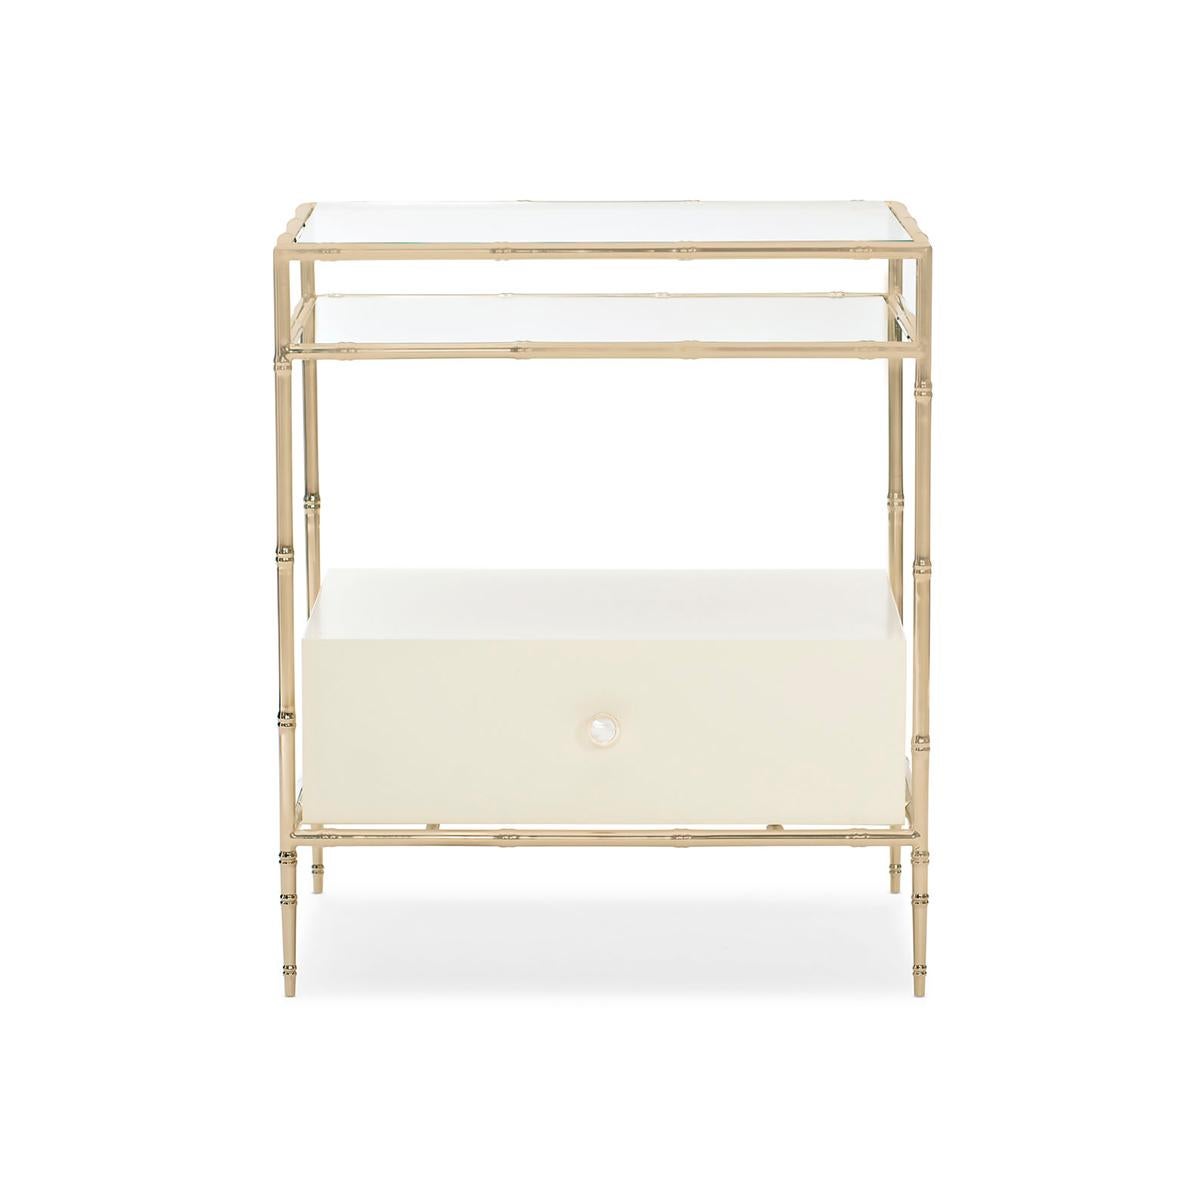 Classic style with a modern perspective, this bedside table feels fresh and light in any environment. The traditional lines of its metal frame are updated with a bamboo motif highlighted with a Whisper of Gold finish. Clear tempered glass gives its